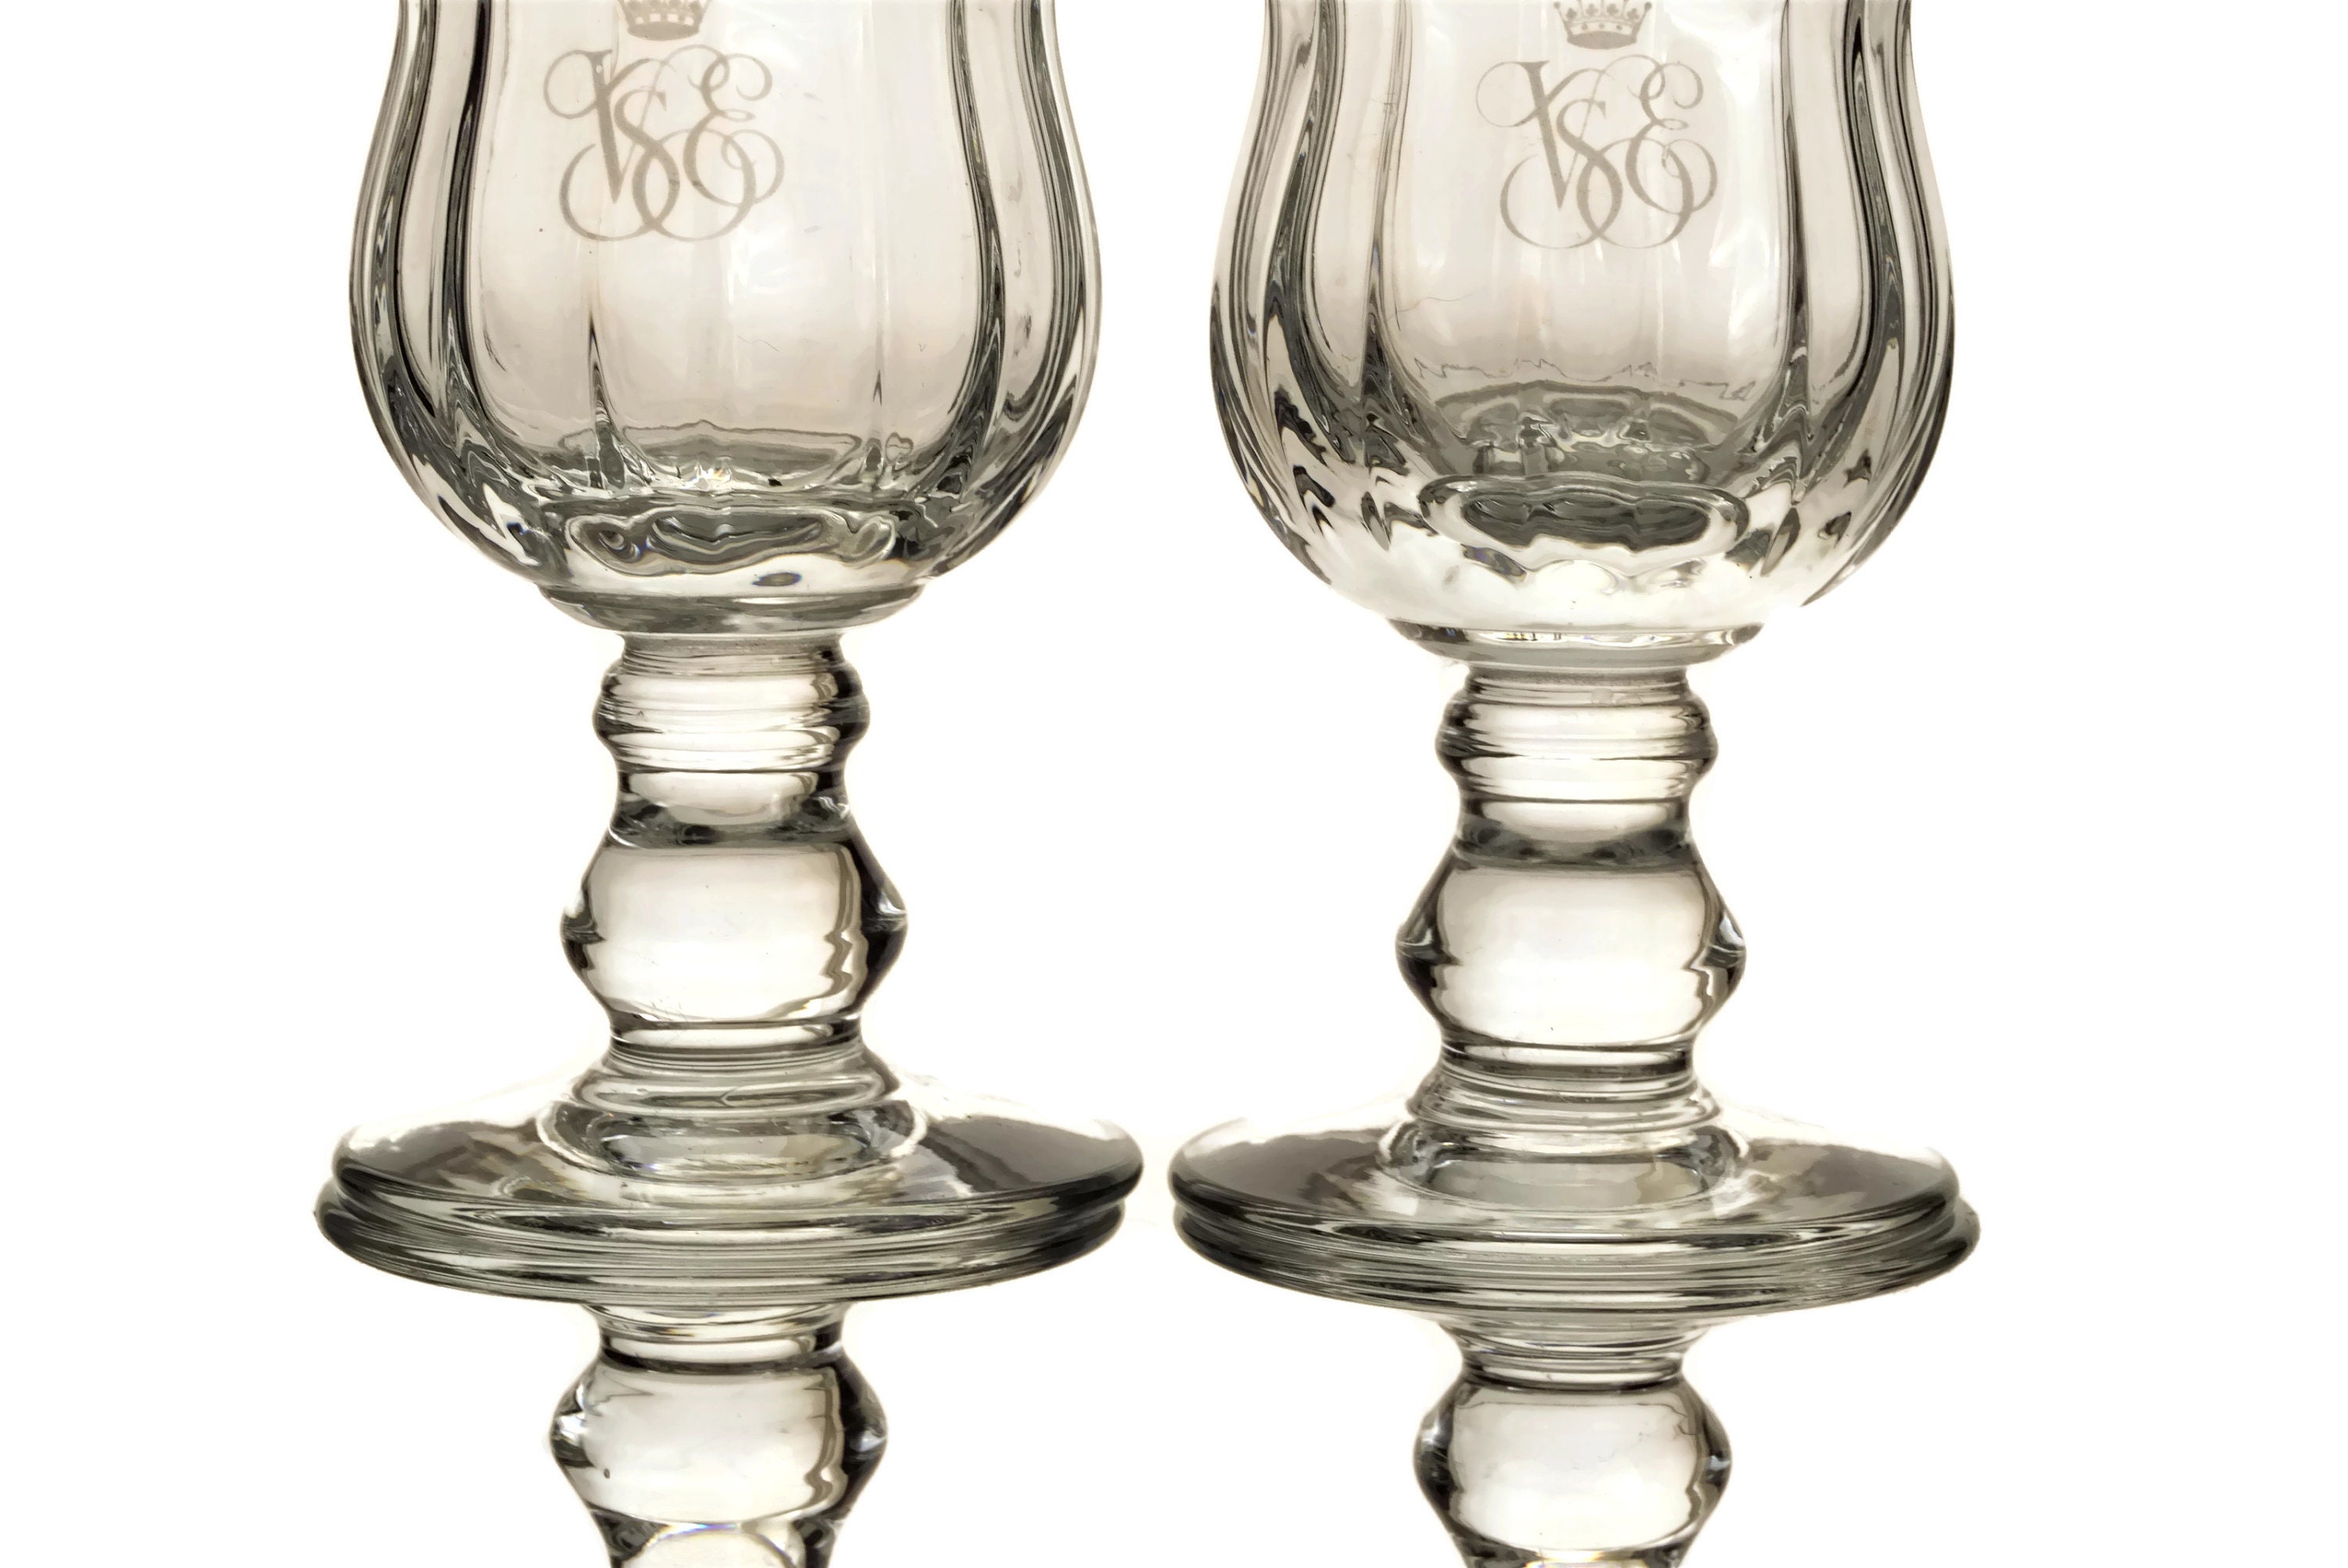 Casarialto Hand-Painted Orient Express Wine Glasses - Set of 4